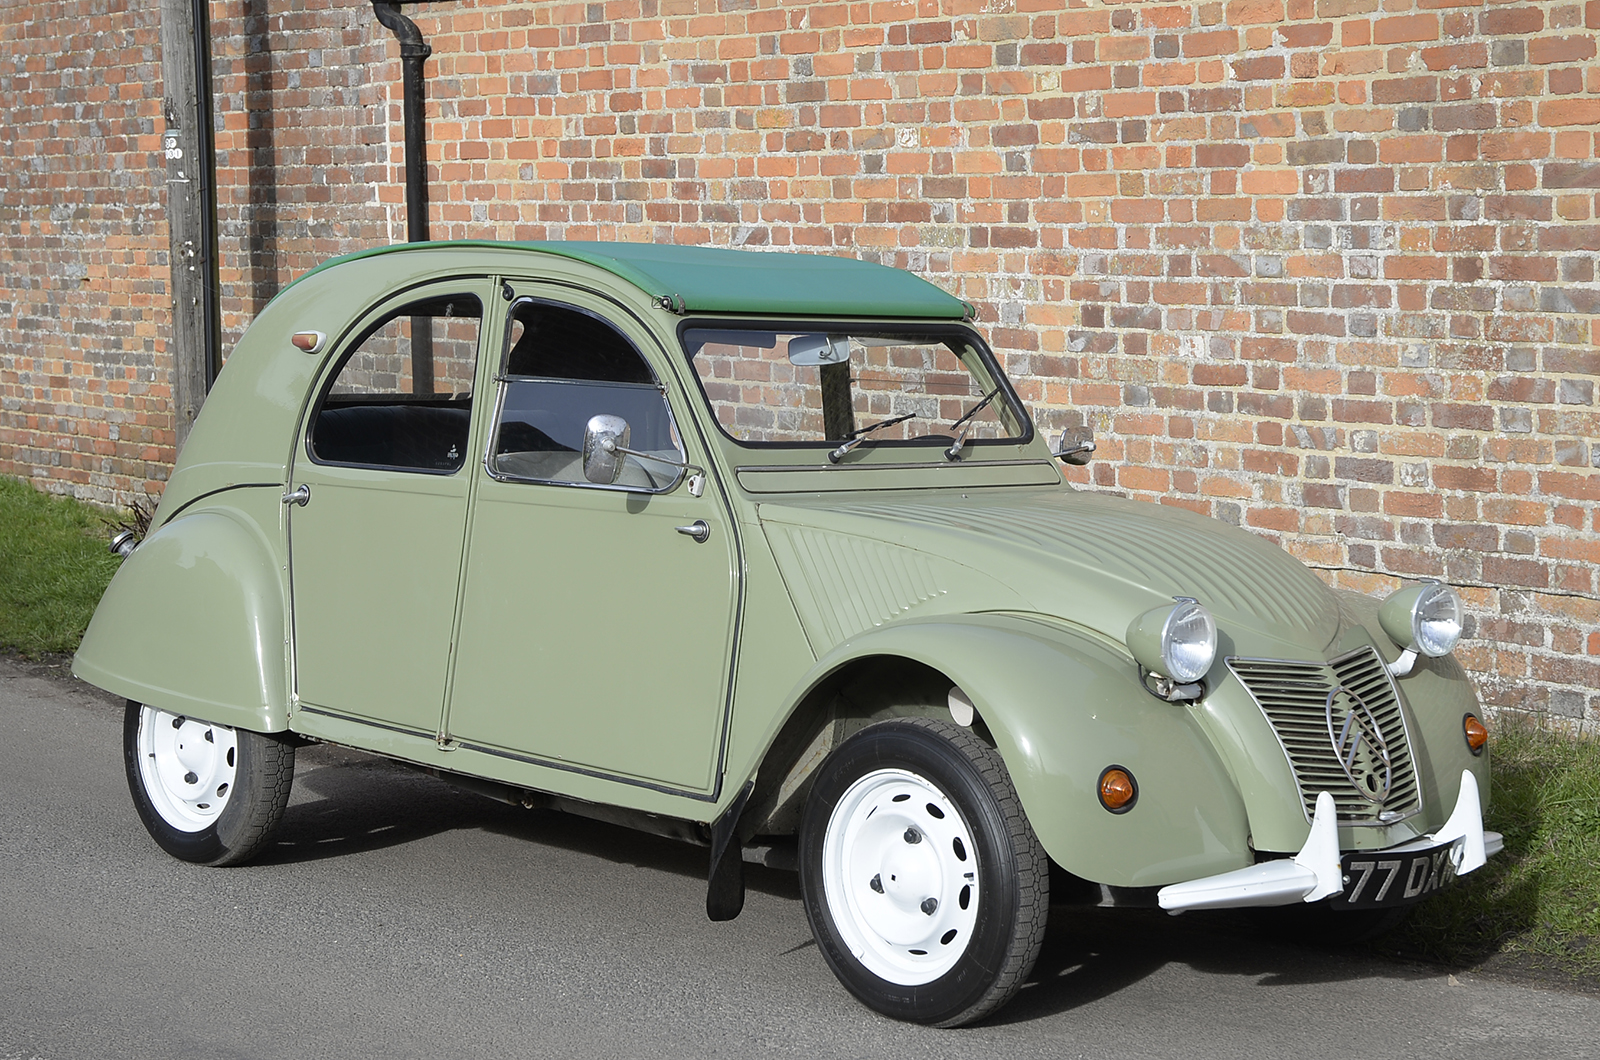 Classic & Sports Car – Classifieds tested: Citroën 2CV for £7750